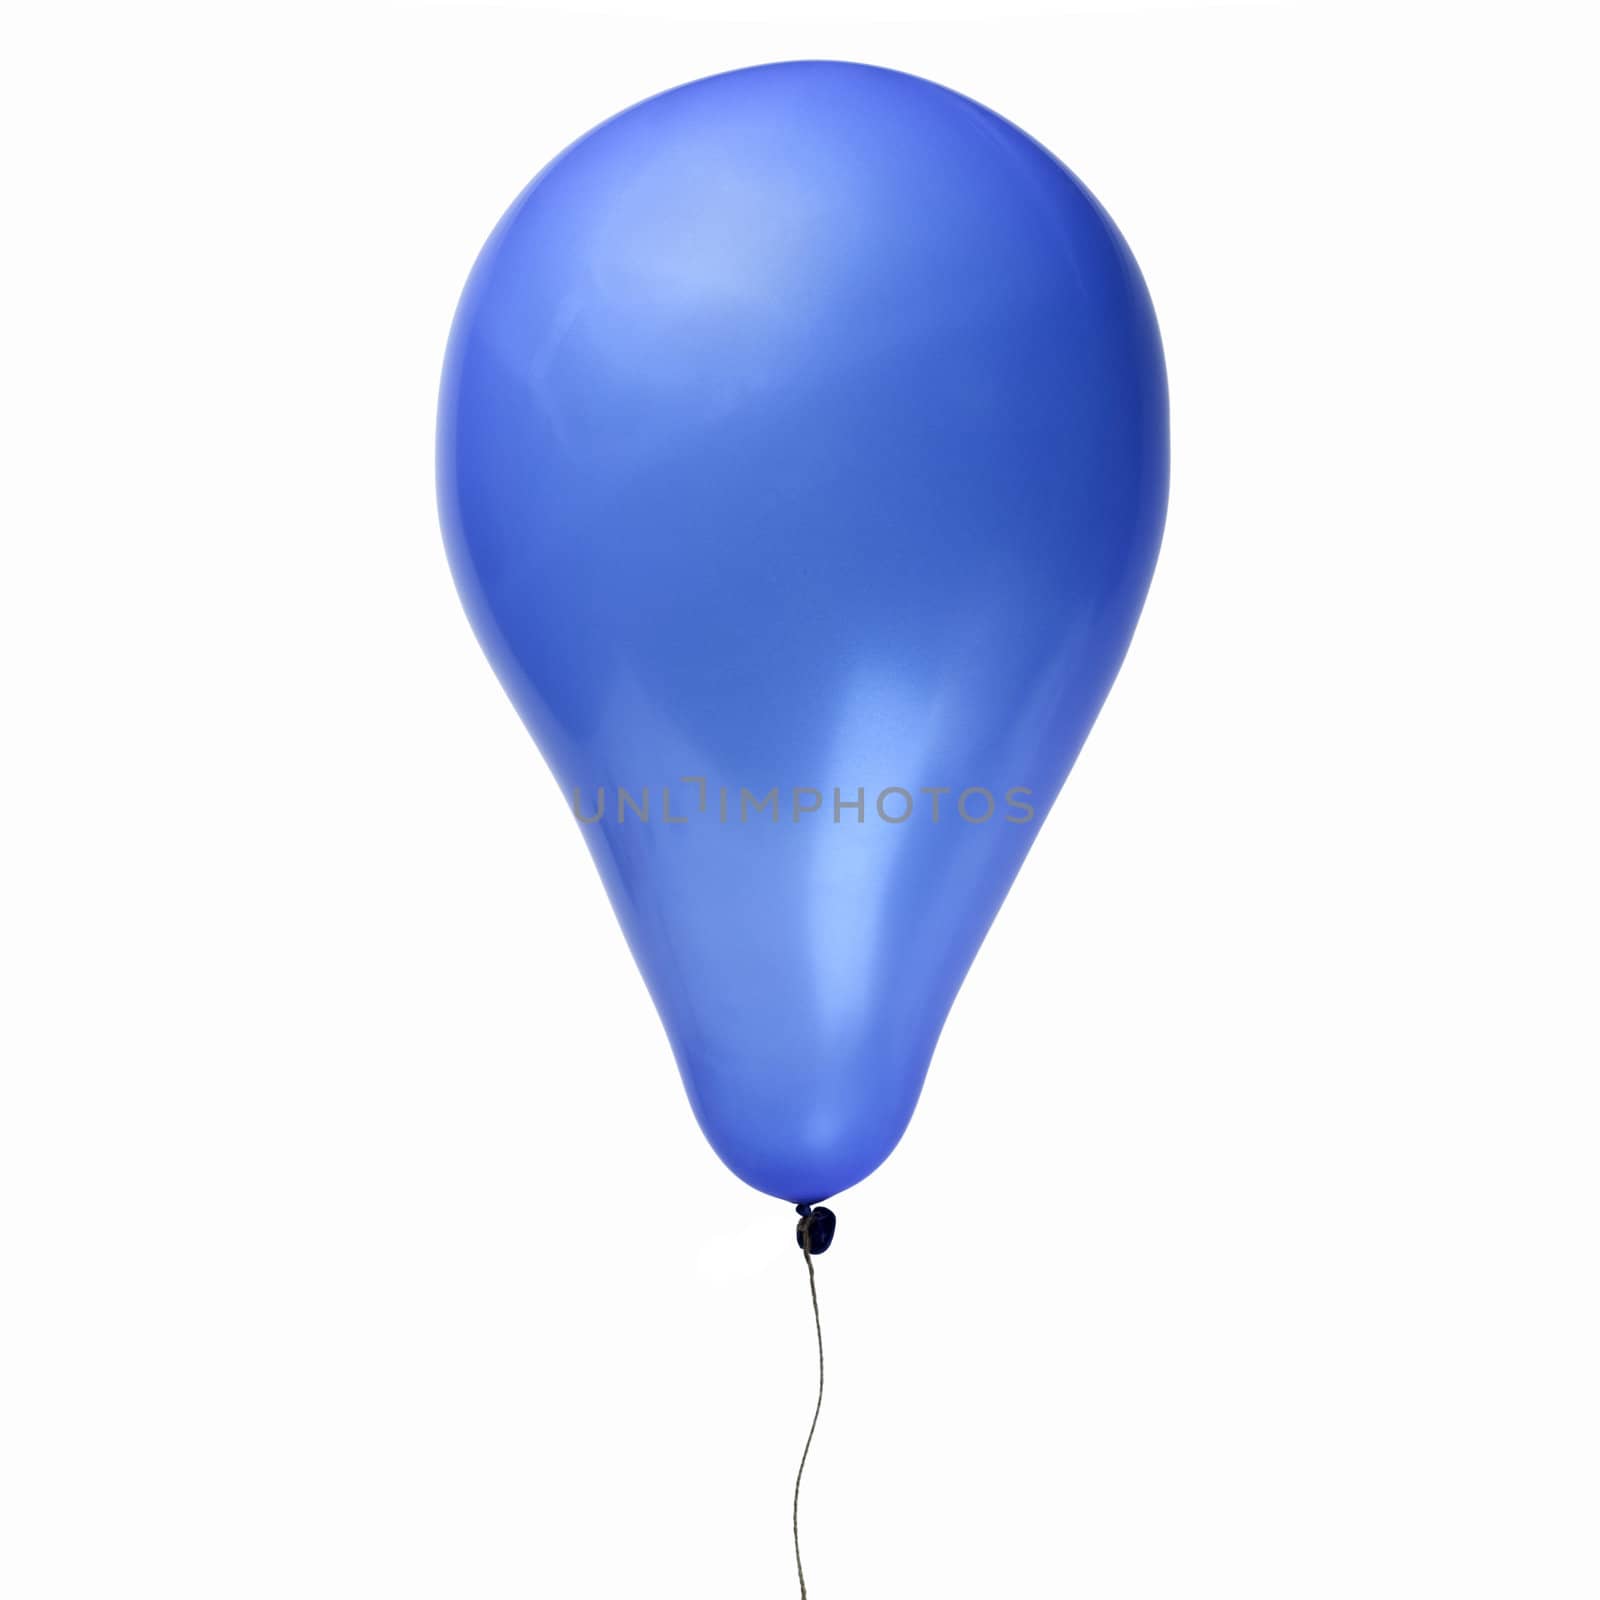 Inflatable balloon, photo on the white background